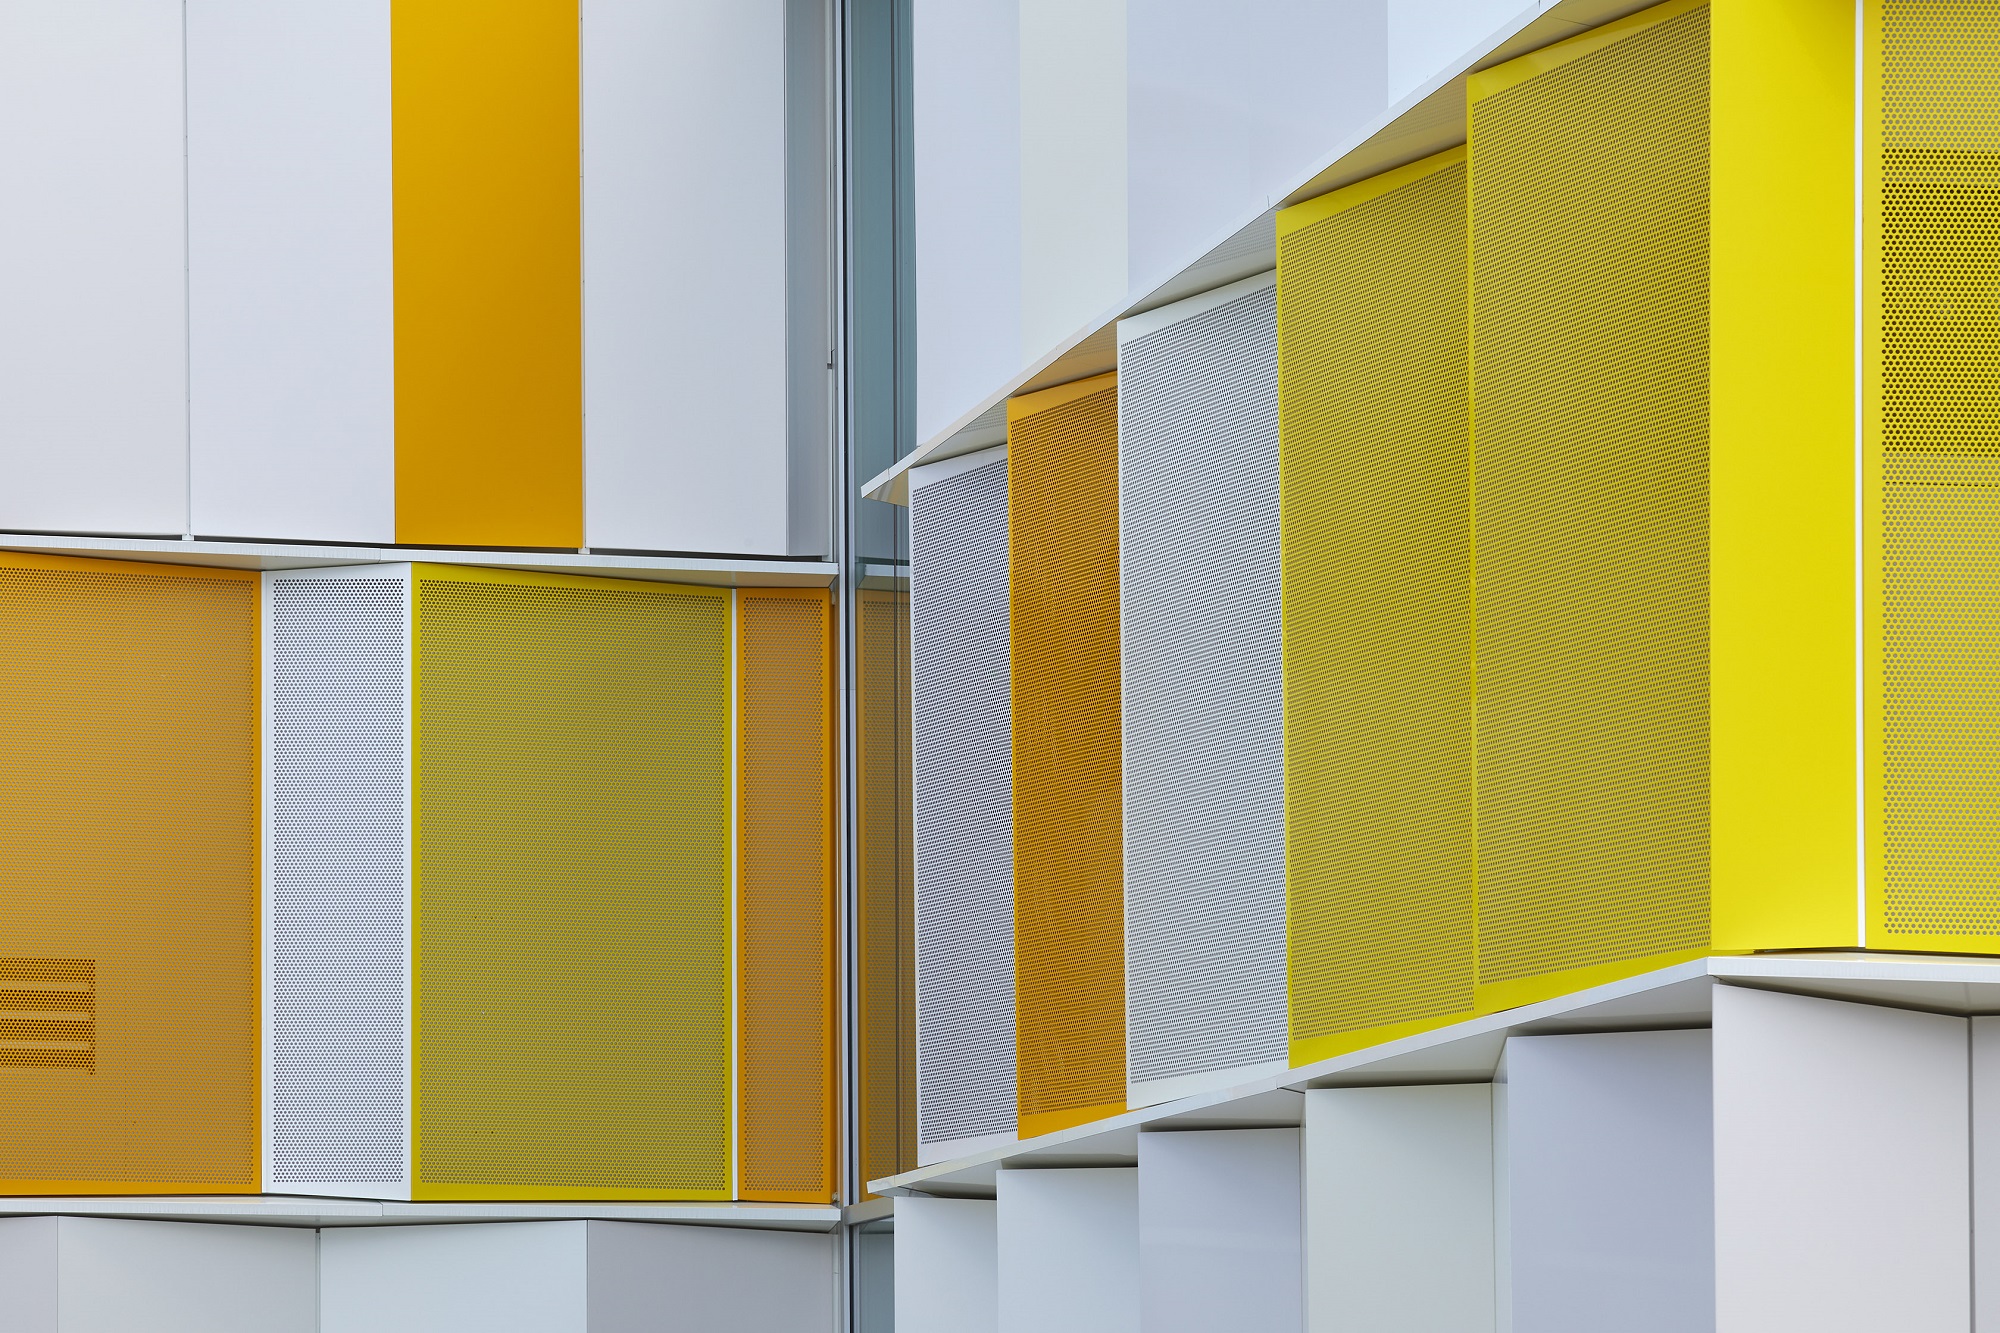 Perforated ALPOLIC metal composite materials in different white and yellow finishes, installed on Fleming College's A Wing